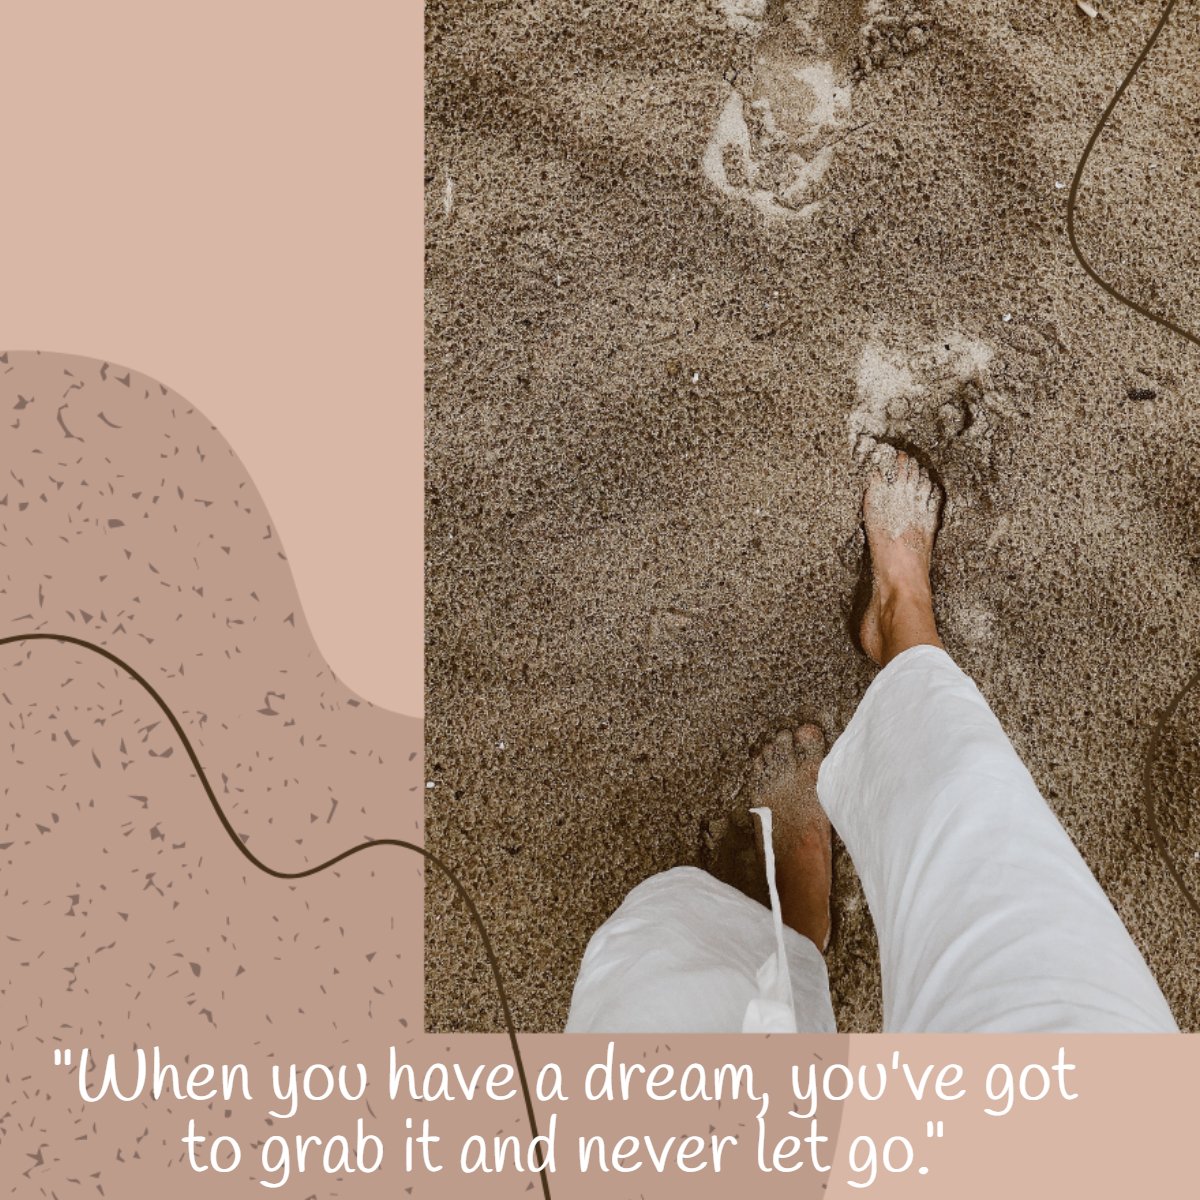 'When you have a dream, you've got to grab it and never let go'
― Carol Burnett

#Motivation   #QuoteofTheDay    #quoteoftheday✏️
#Realestate #fairlawn #paramus #saddlebrook #njrealestate #bergencounty #forsalebuyowner #propertymanagement #homeseller #appraisel